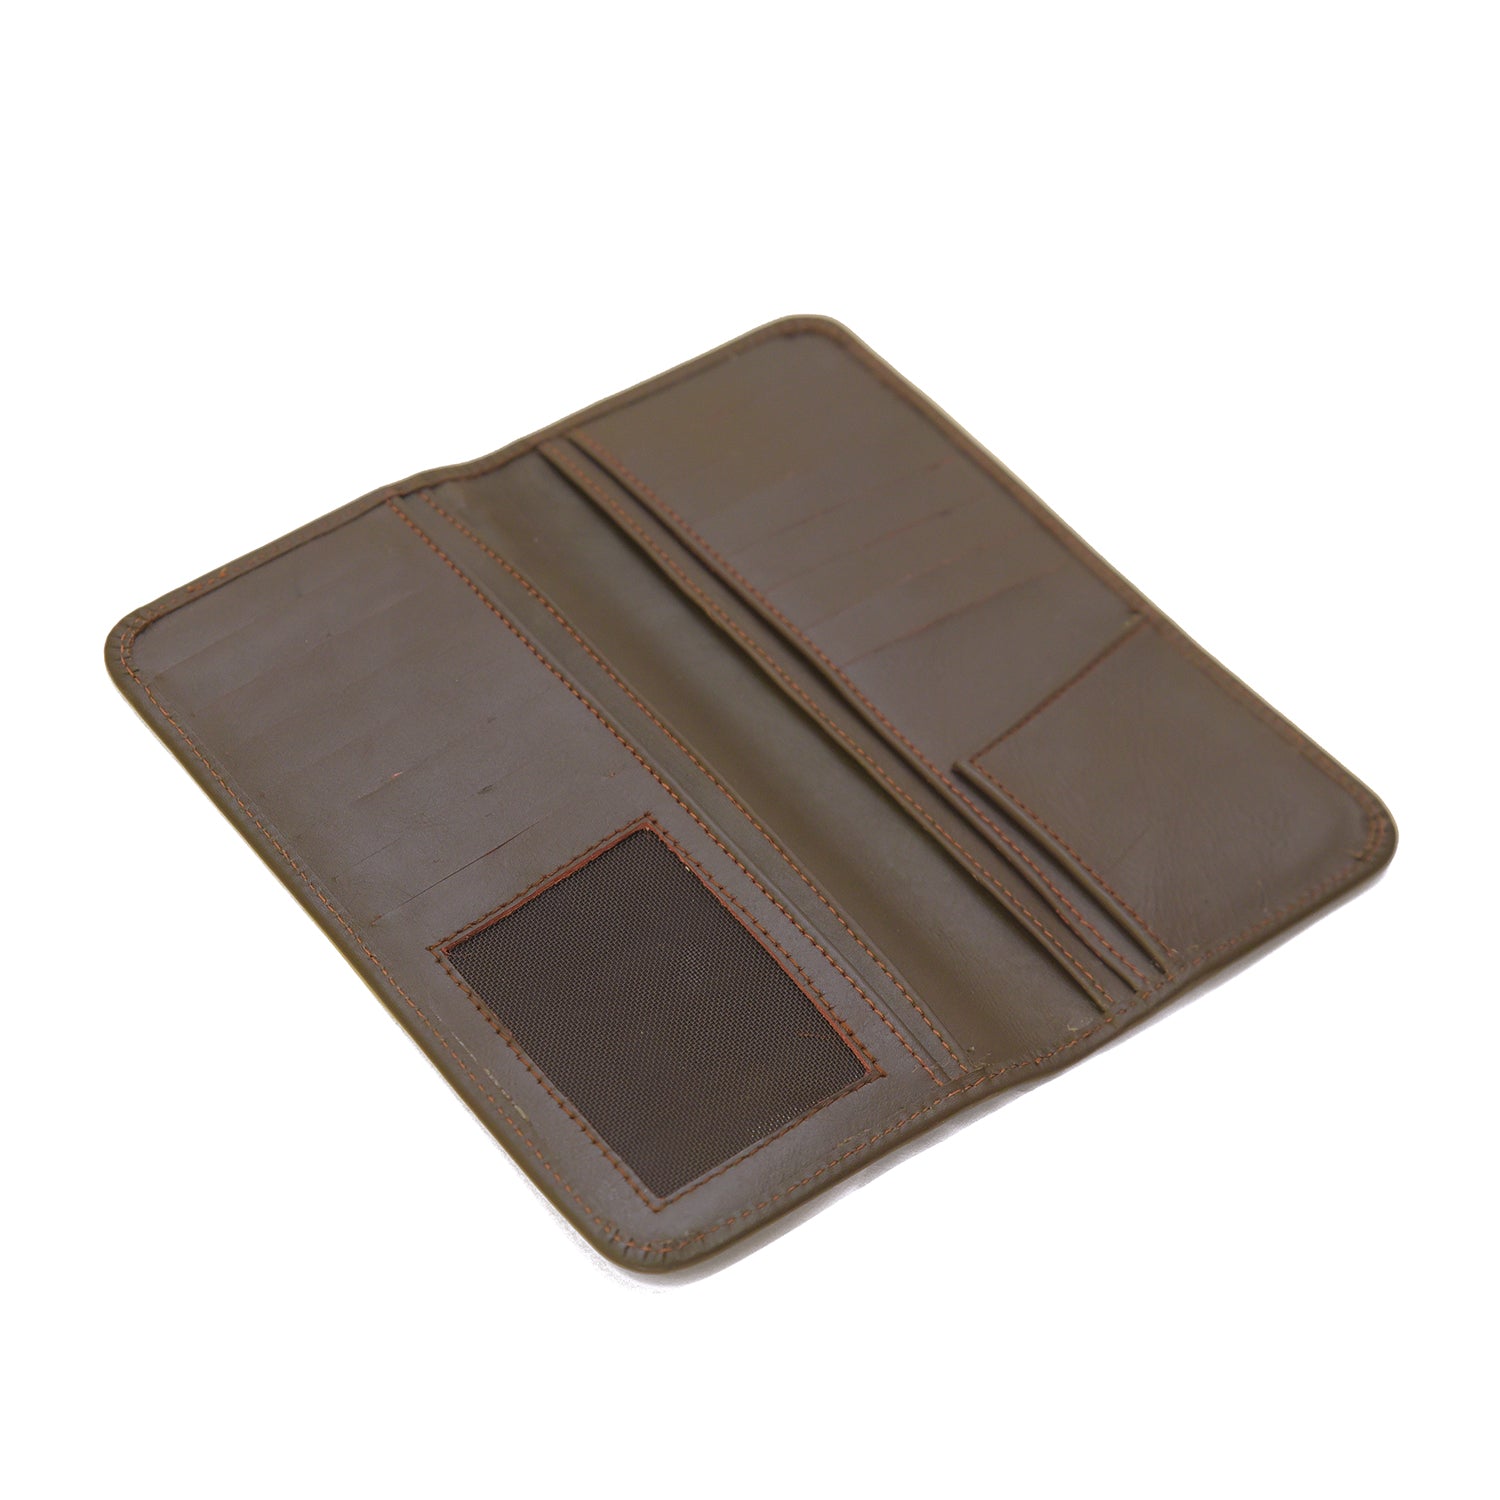 smart leather wallet Chocolate brown